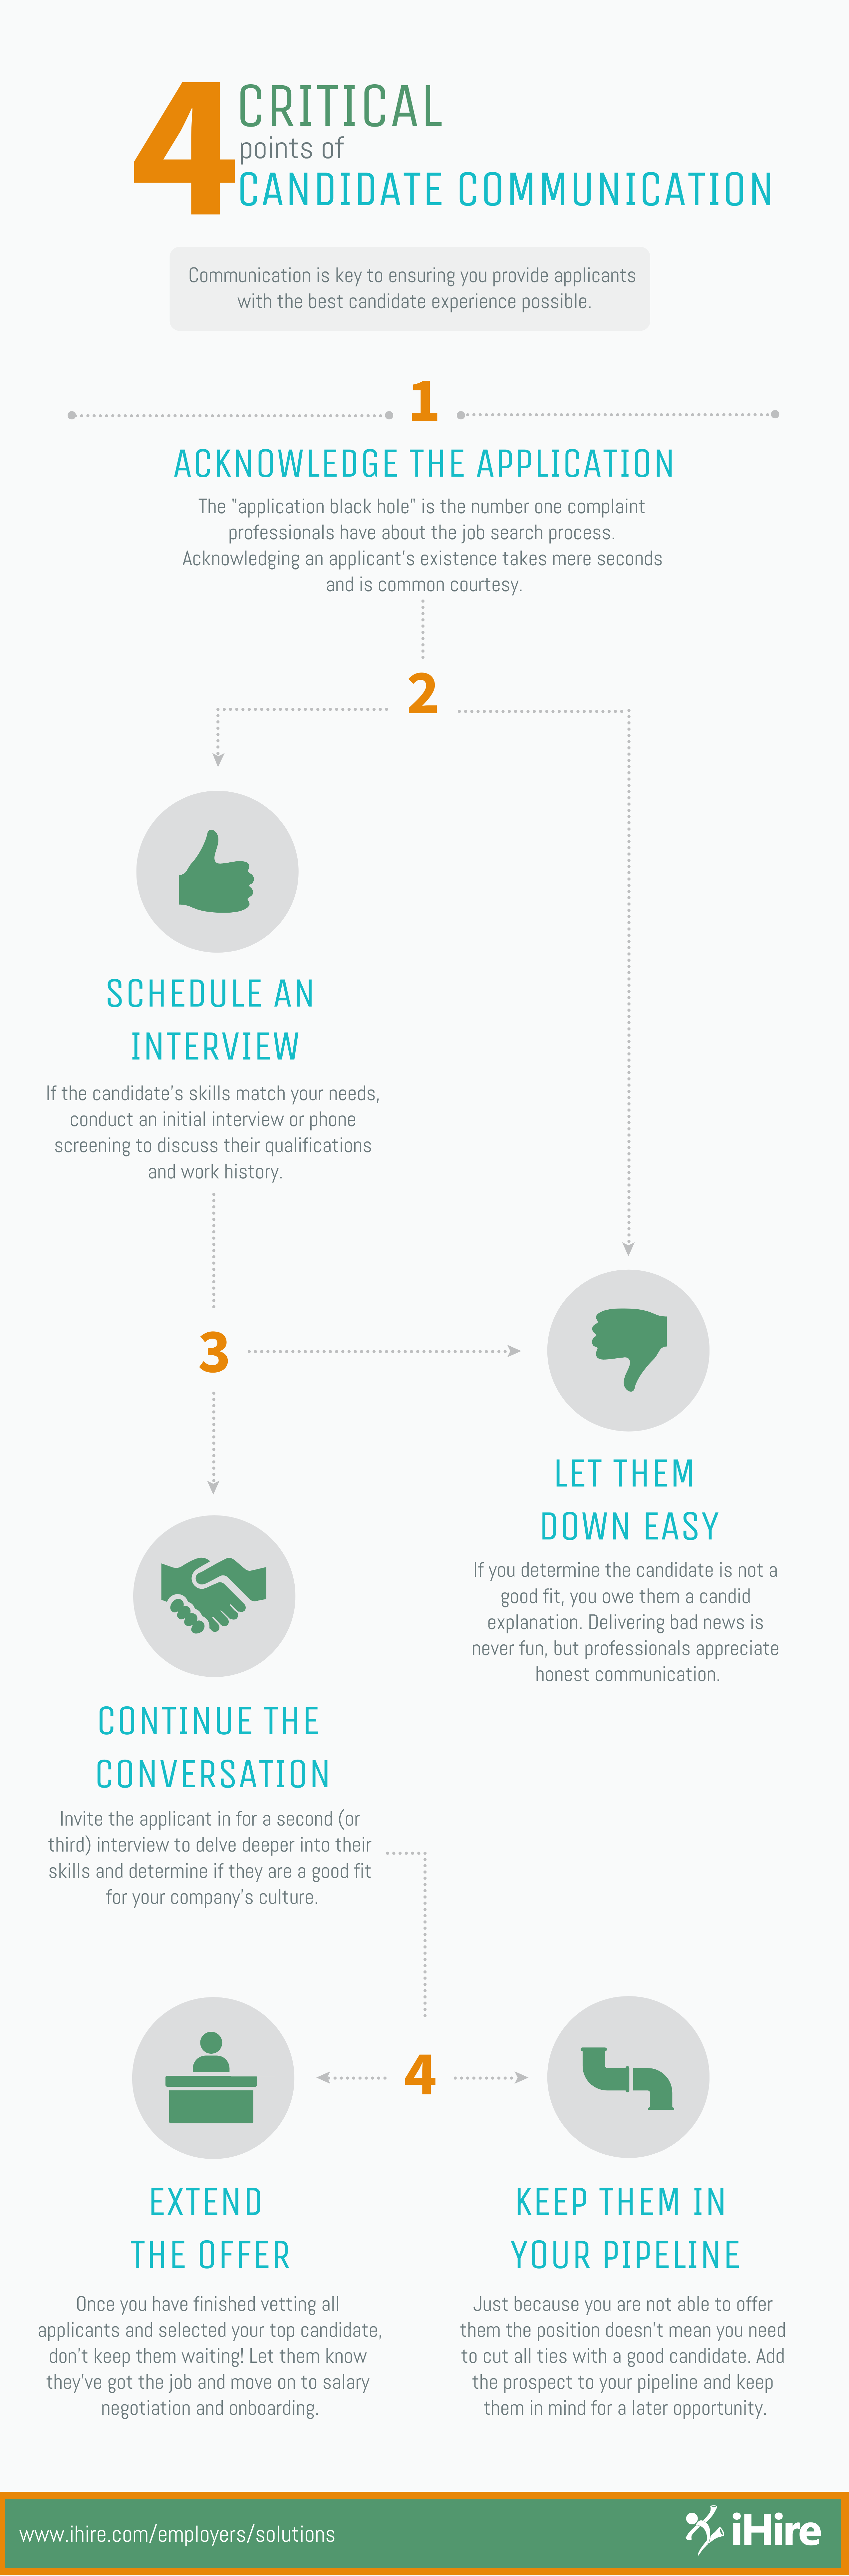 Process map showing critical points of communication during the hiring process. Infographic.